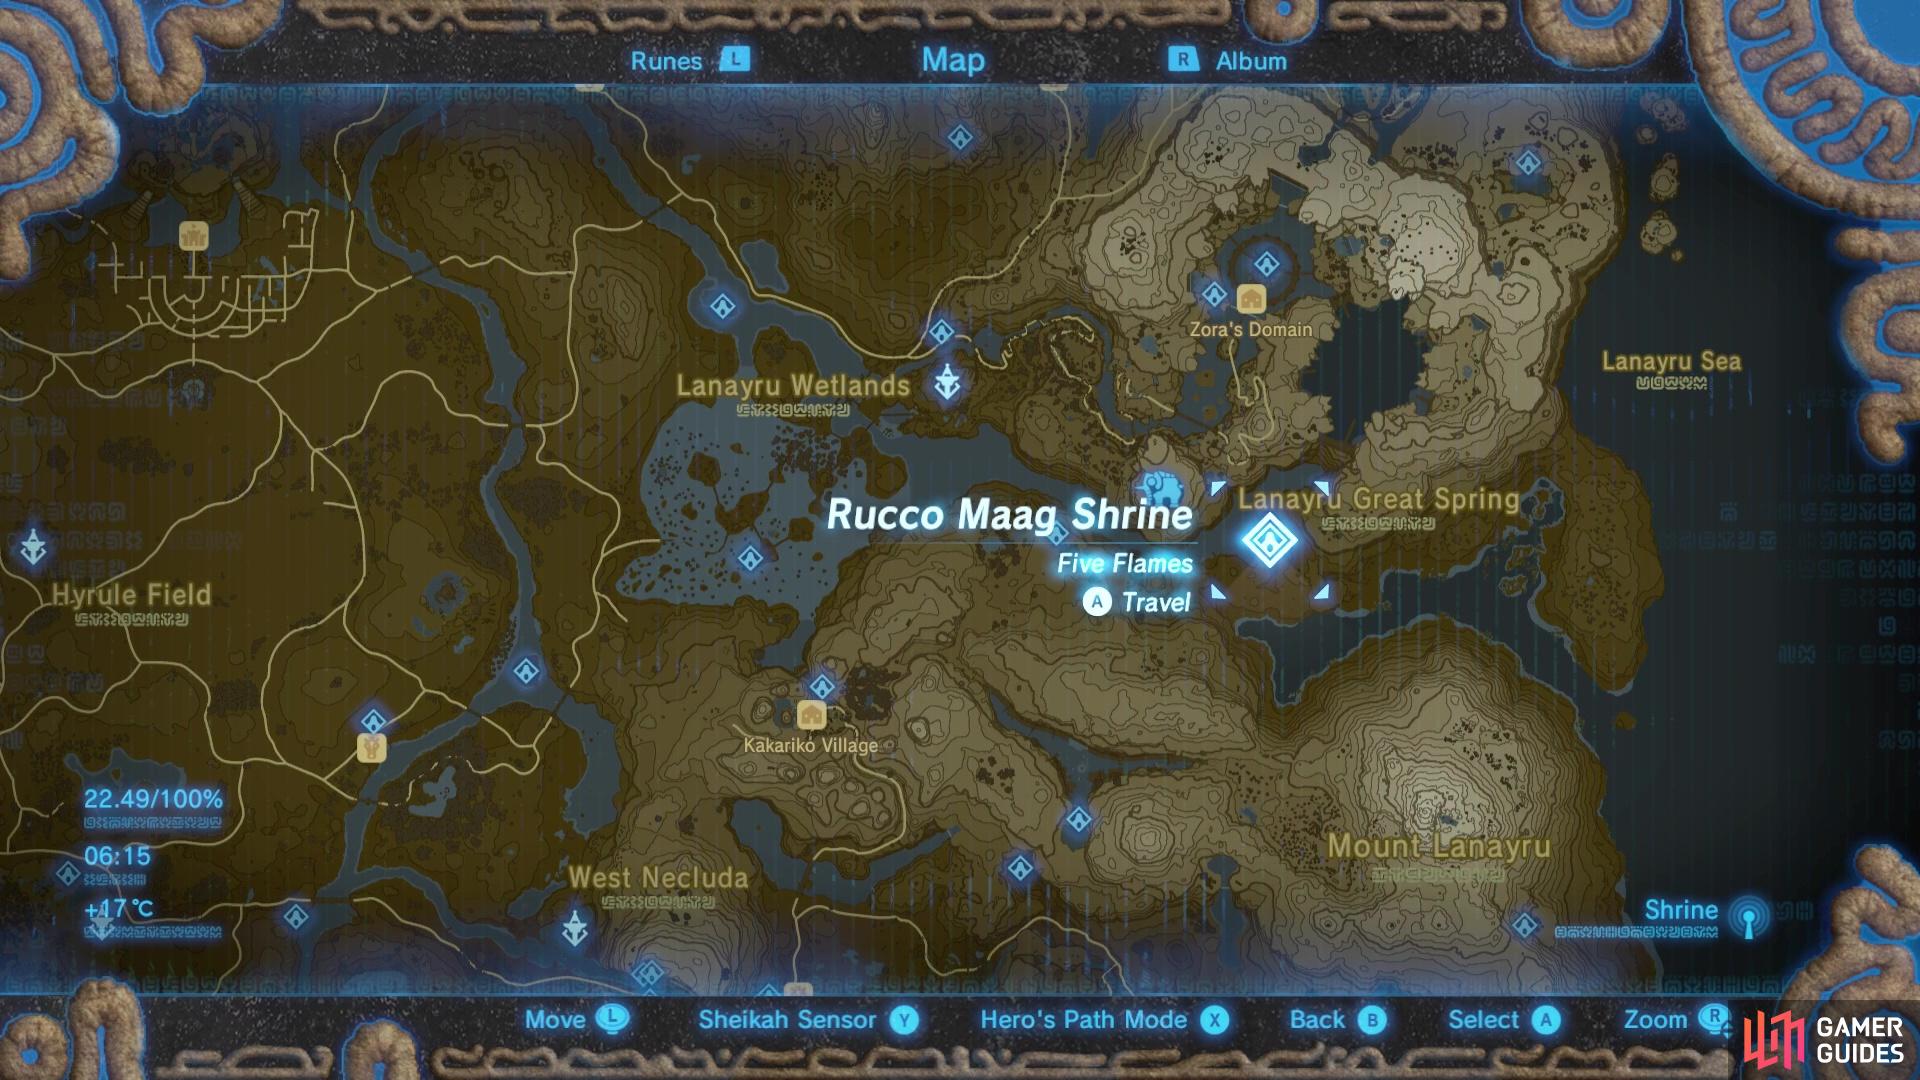 Rucco Maag Shrine is found south of Zora's Domain